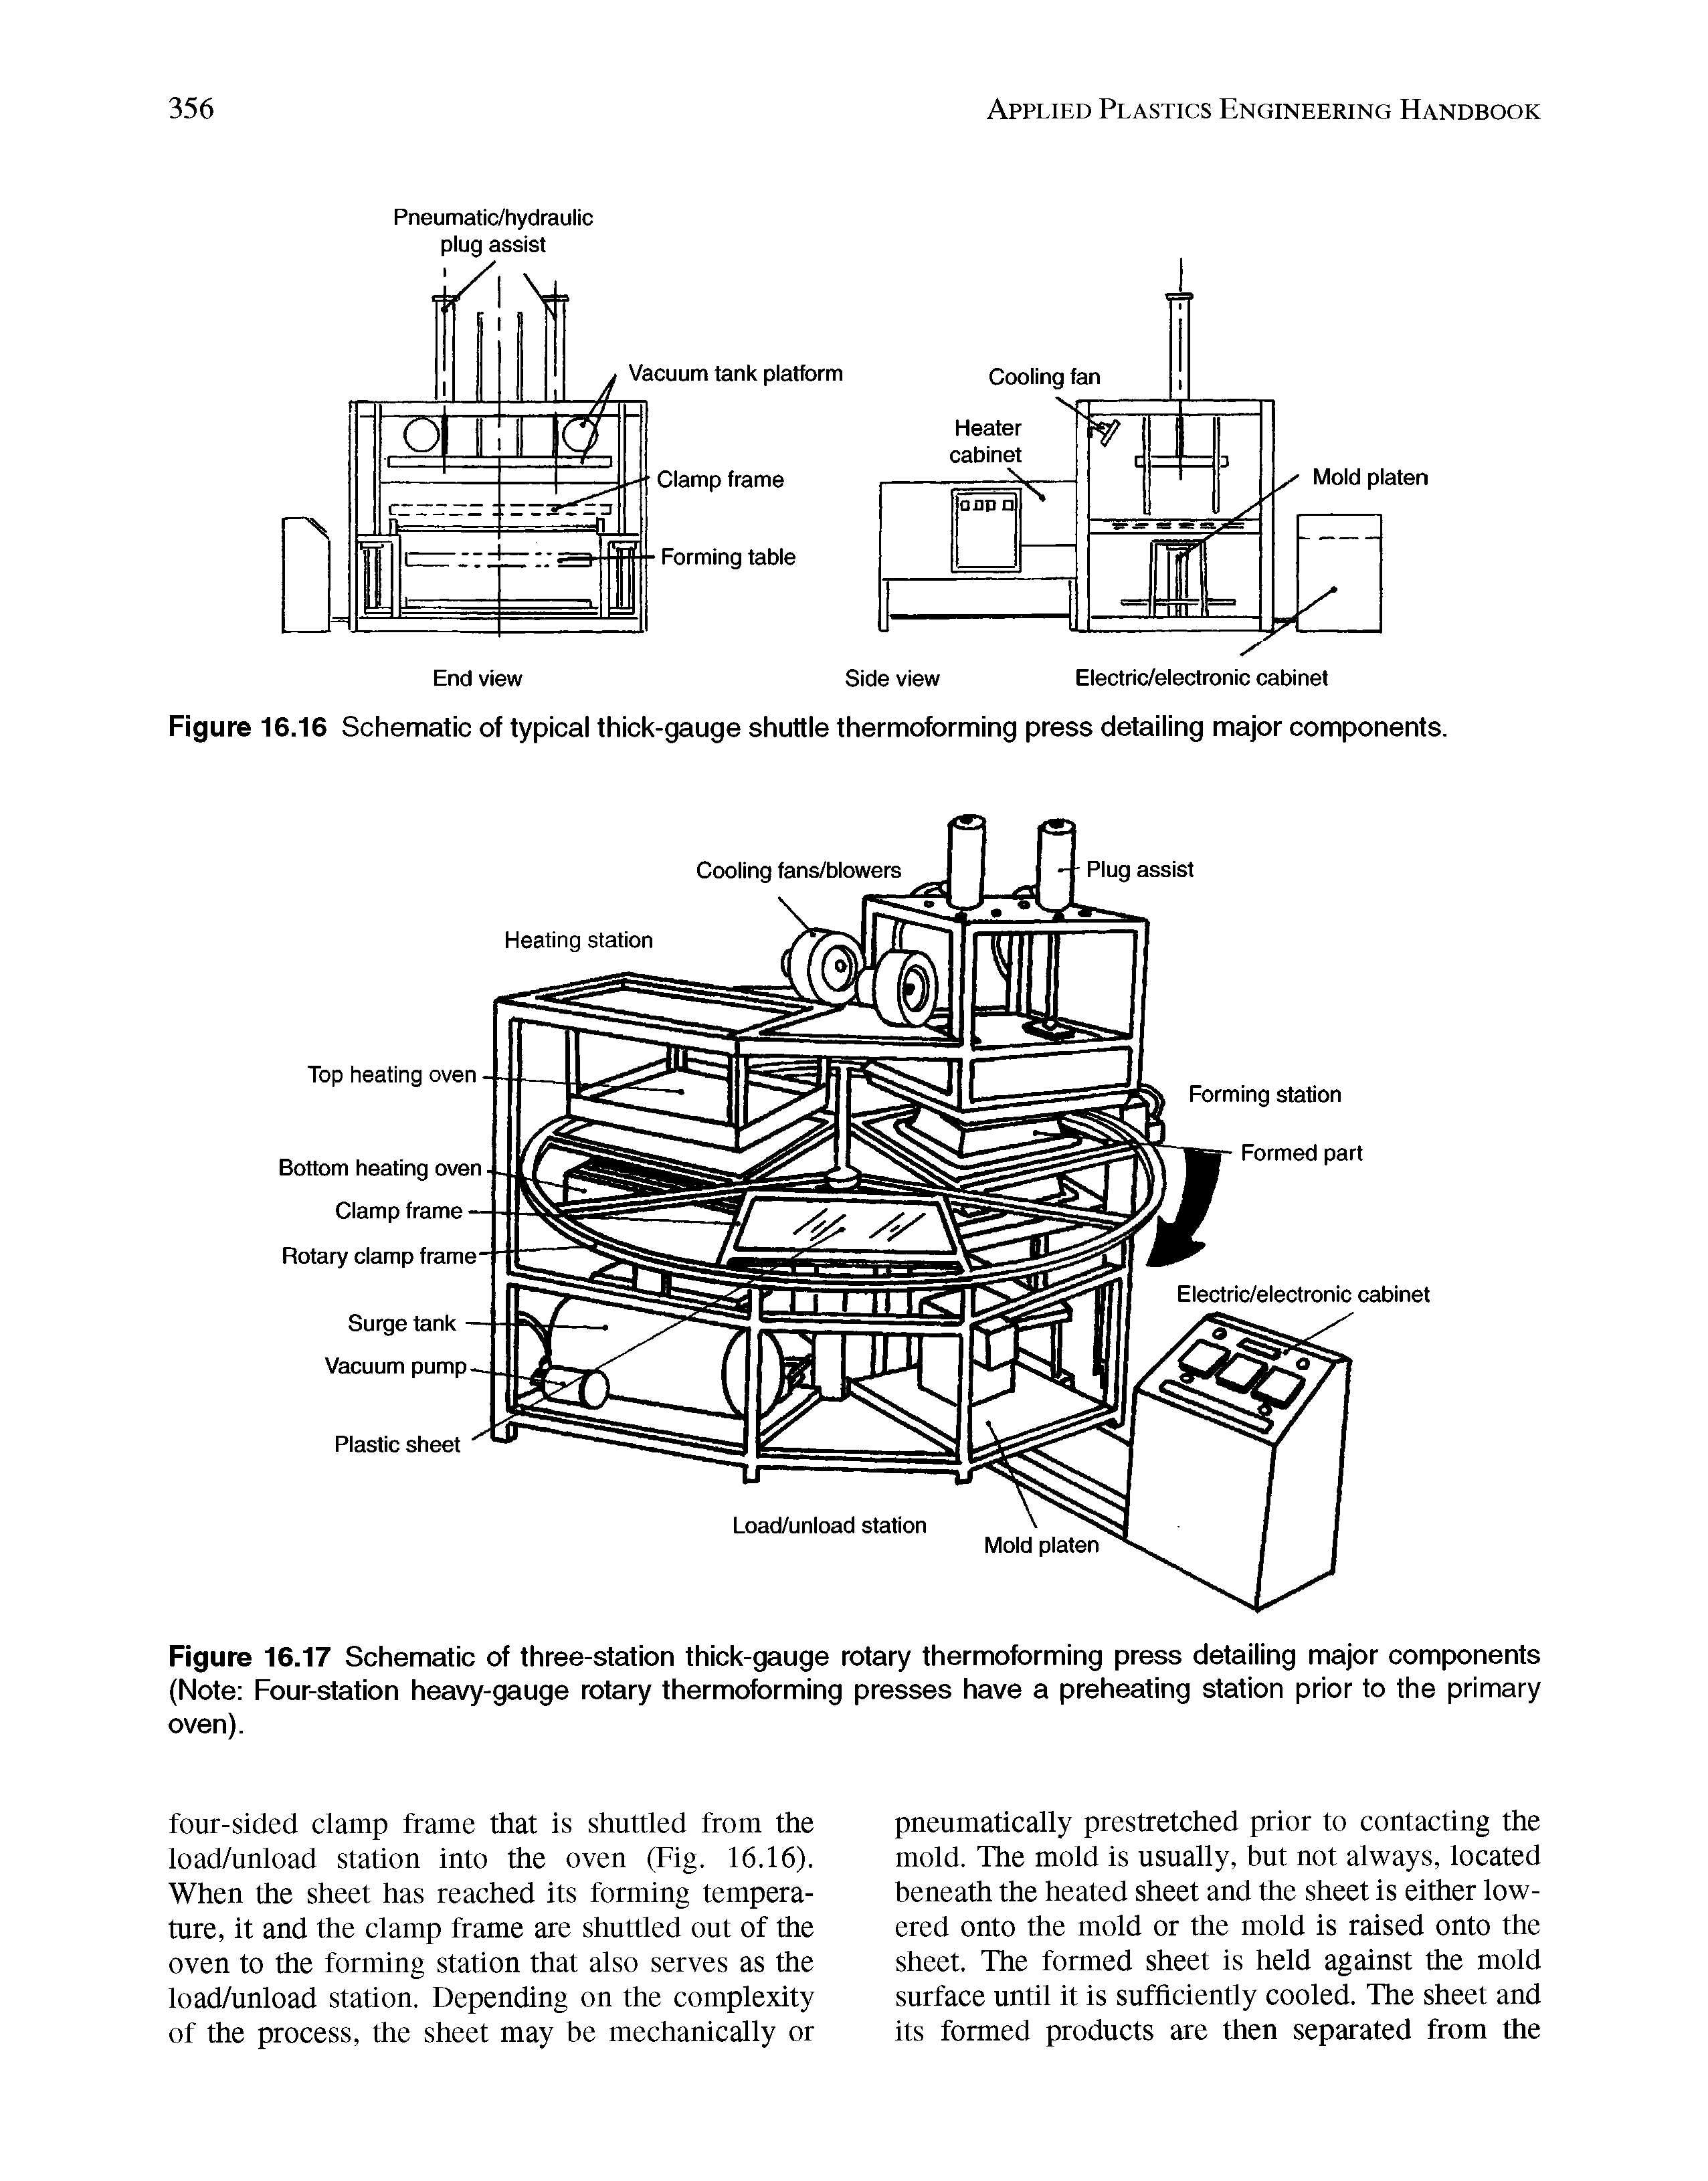 Figure 16.17 Schematic of three-station thick-gauge rotary thermoforming press detailing major components (Note Four-station heavy-gauge rotary thermoforming presses have a preheating station prior to the primary oven).